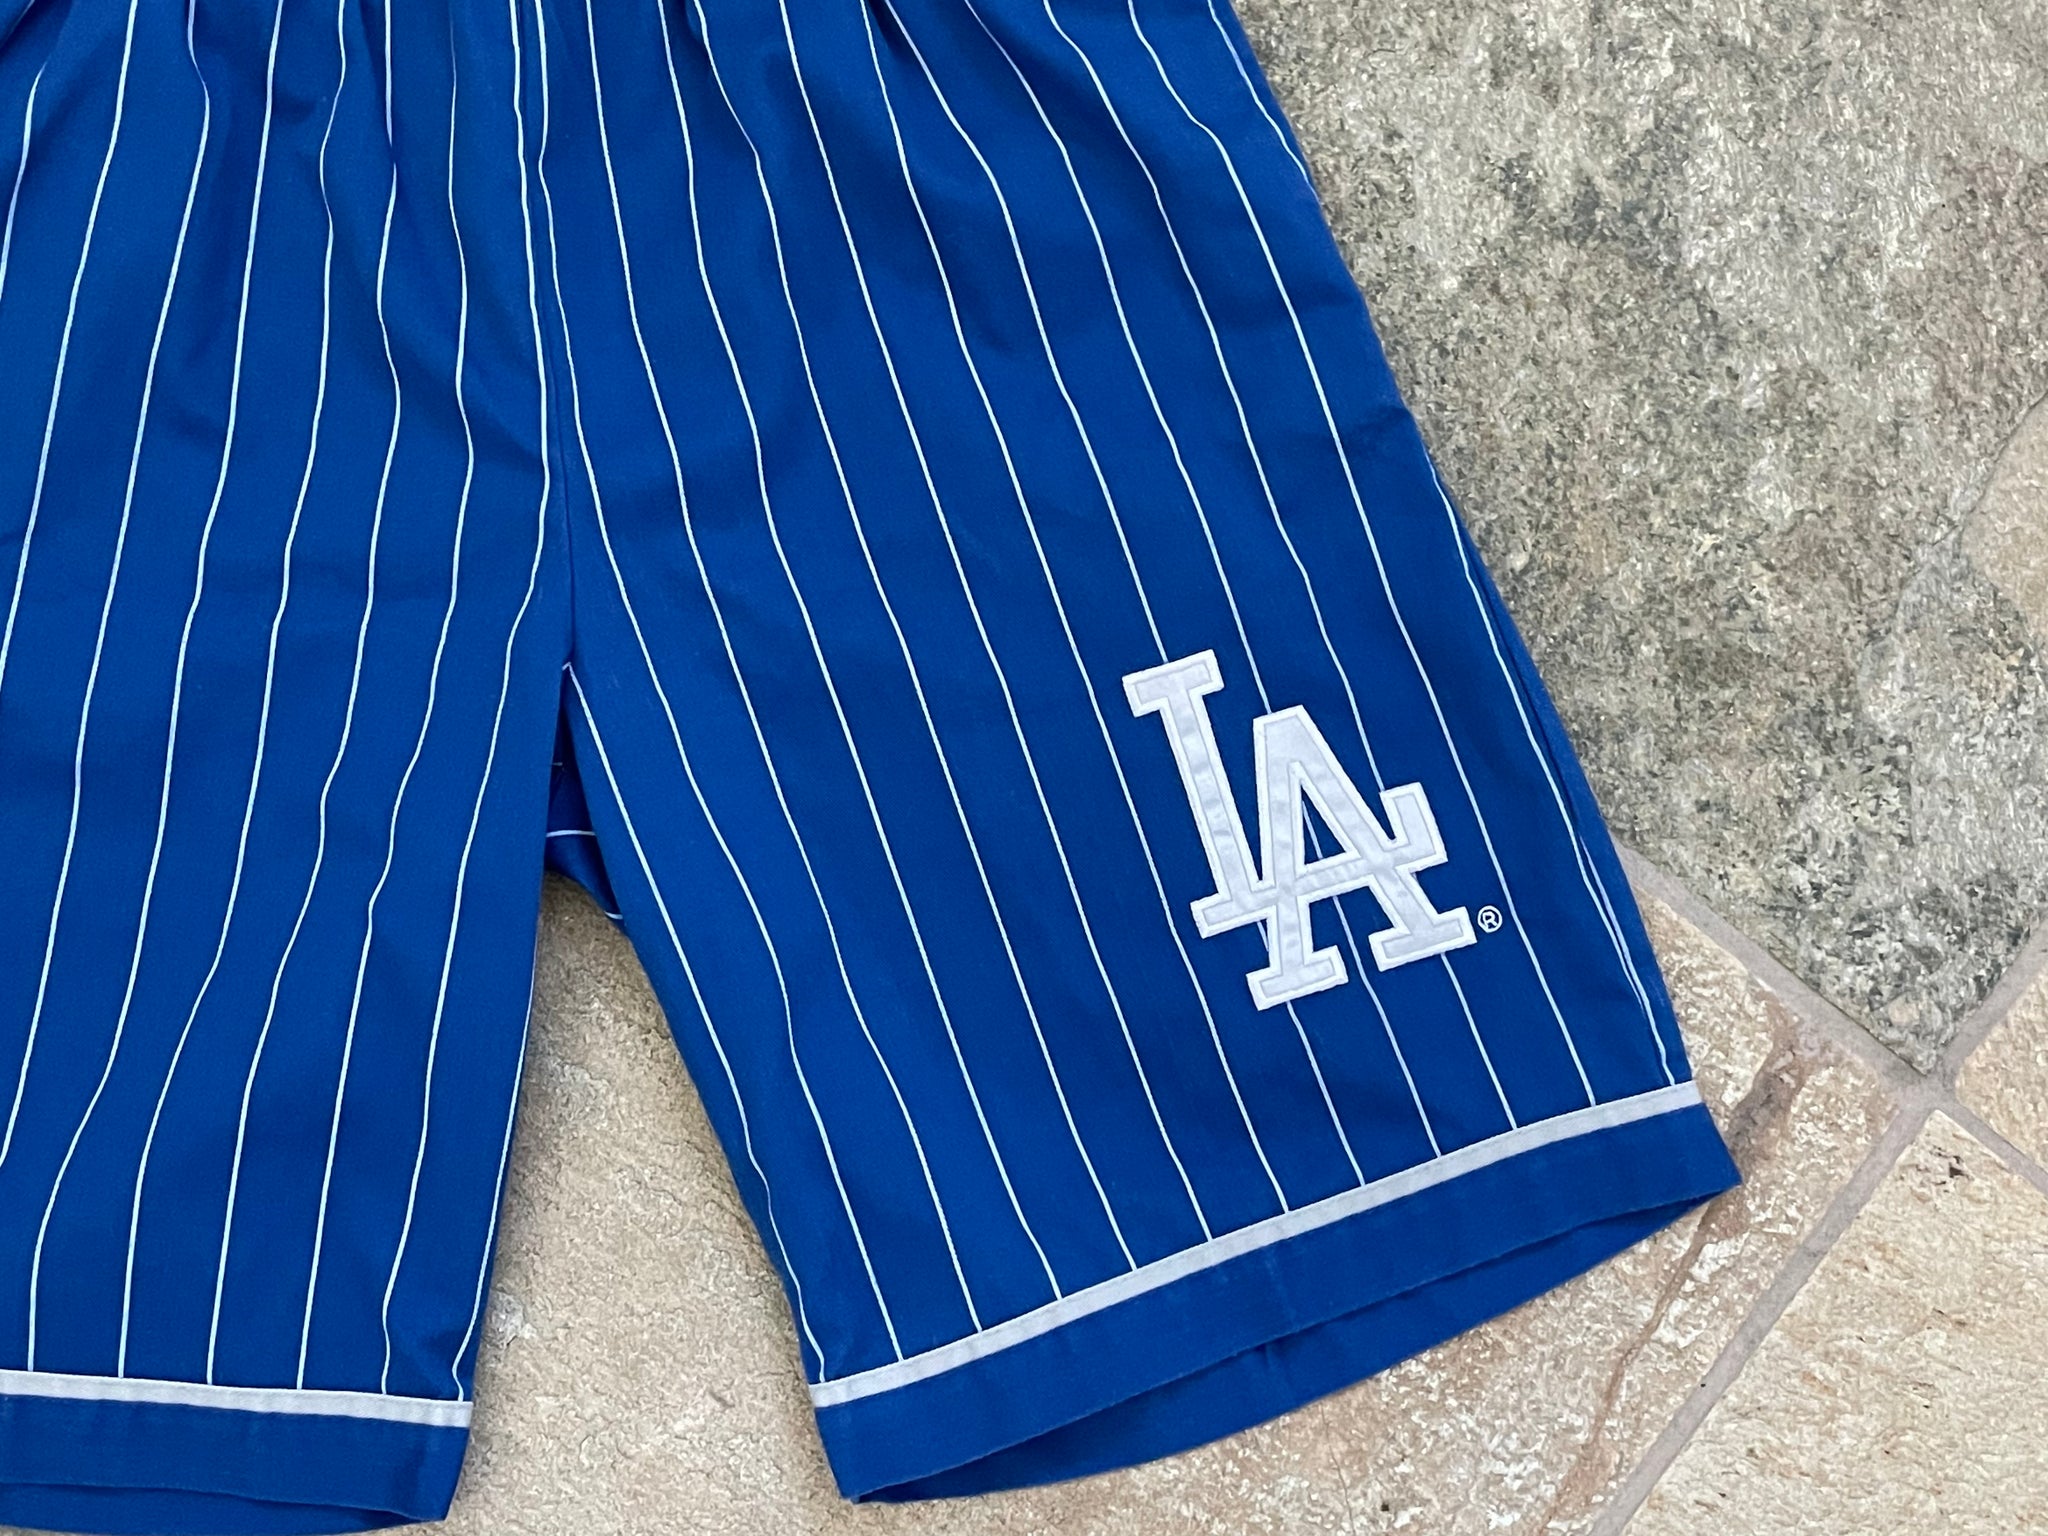 Vintage Los Angeles Dodgers Starter Pinstripe Baseball Shorts, Size Me –  Stuck In The 90s Sports